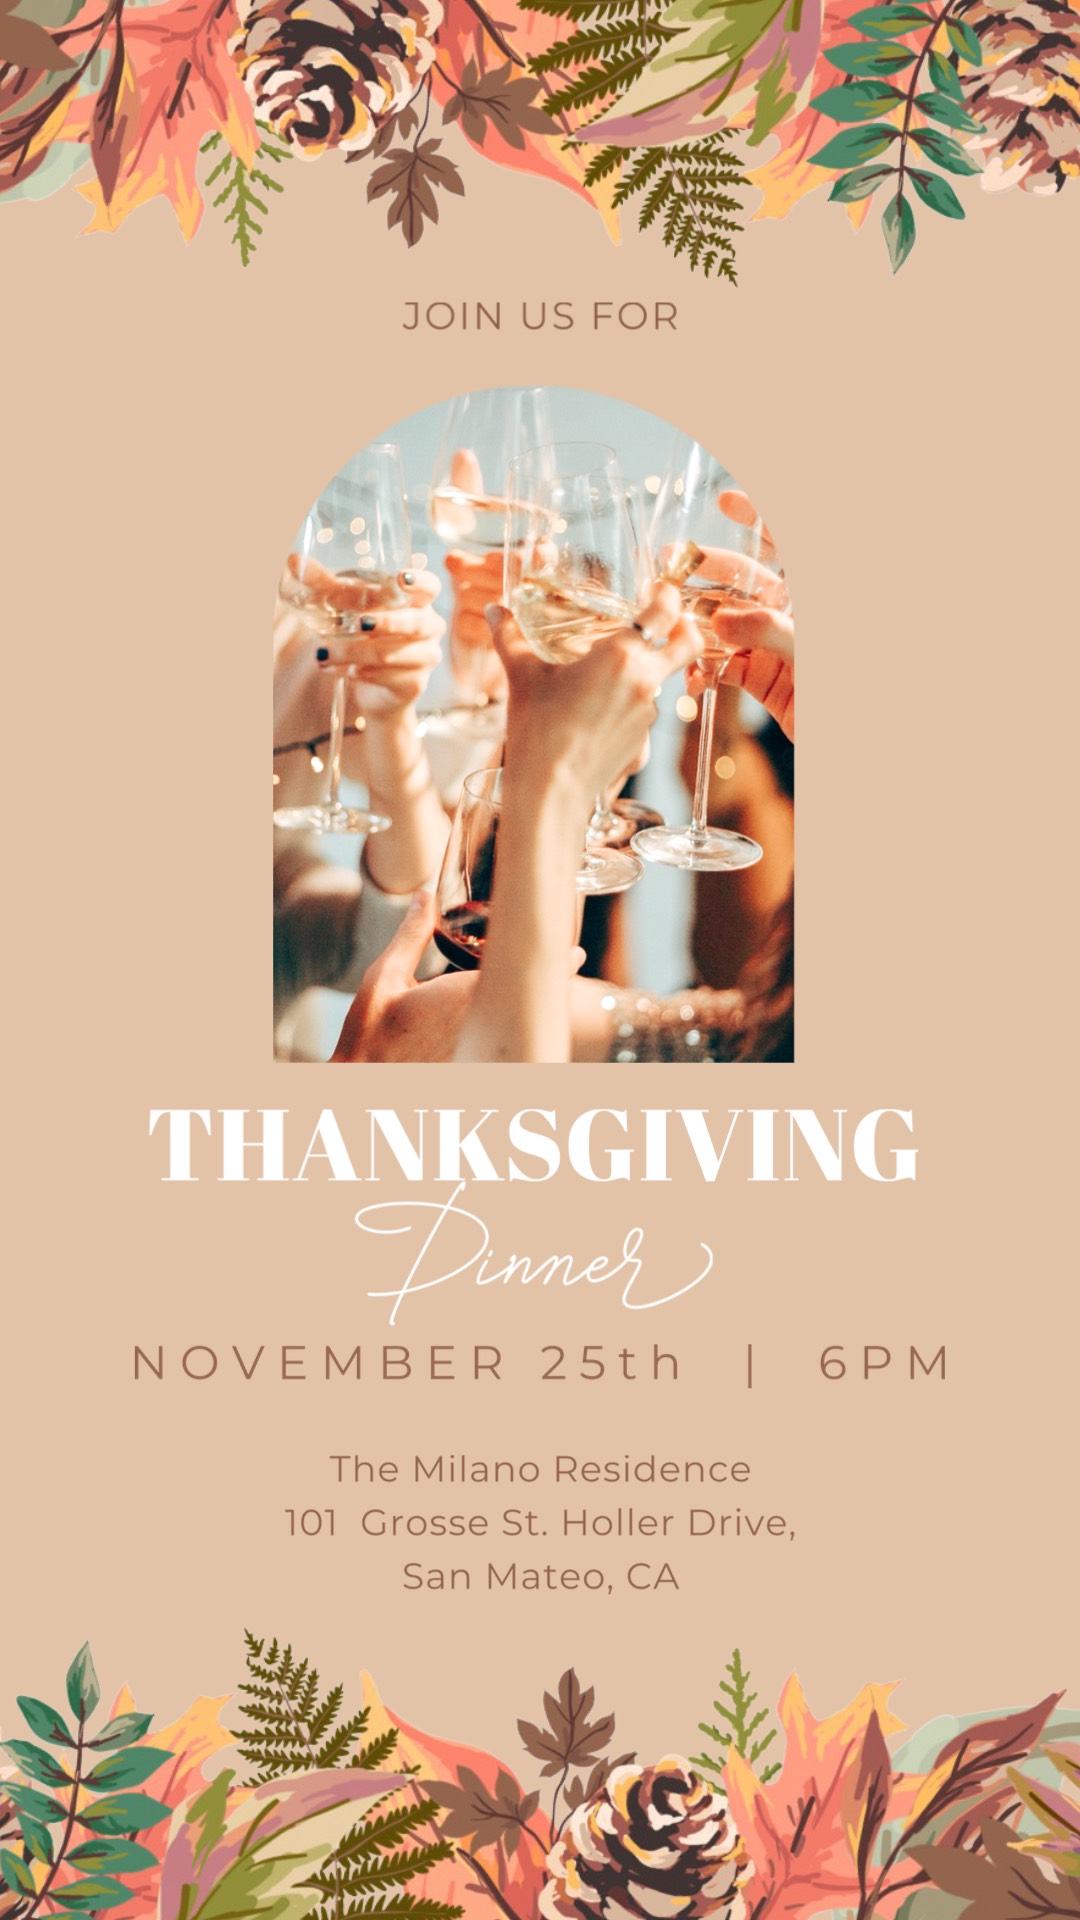 A Flyer For A Thanksgiving Dinner With A Picture Of People Holding Wine Glasses Thanksgiving Template